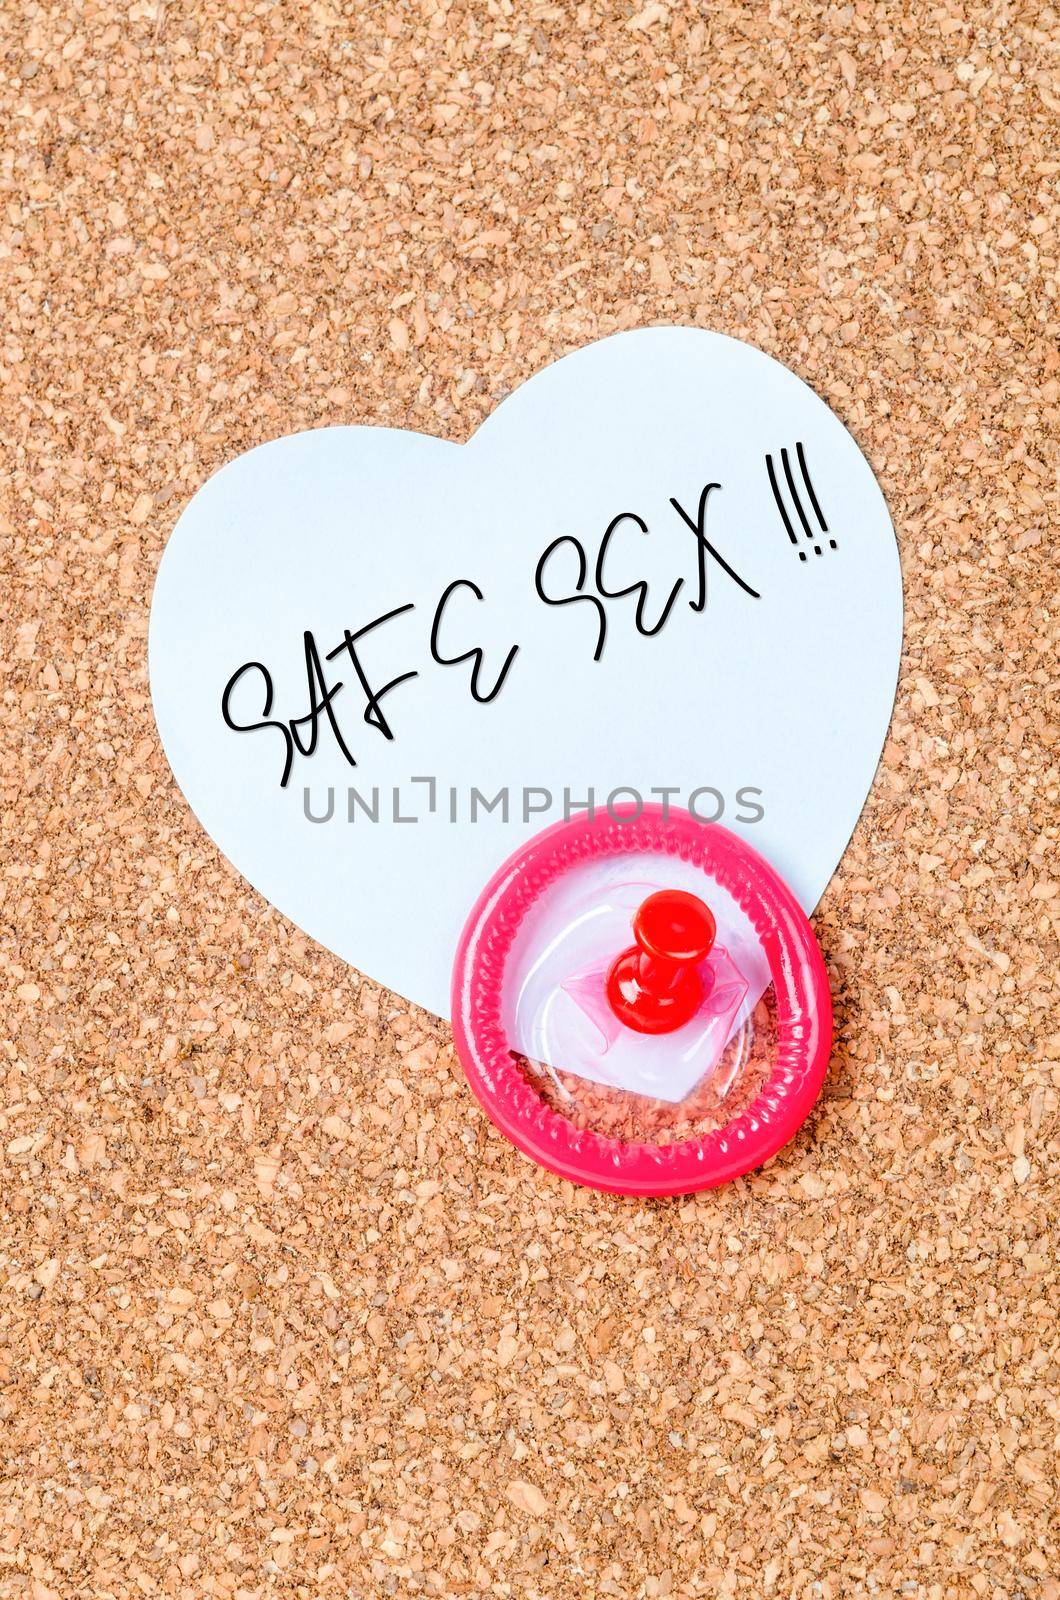 Safe sex message and condom with pin on wooden board for reminder. by Gamjai